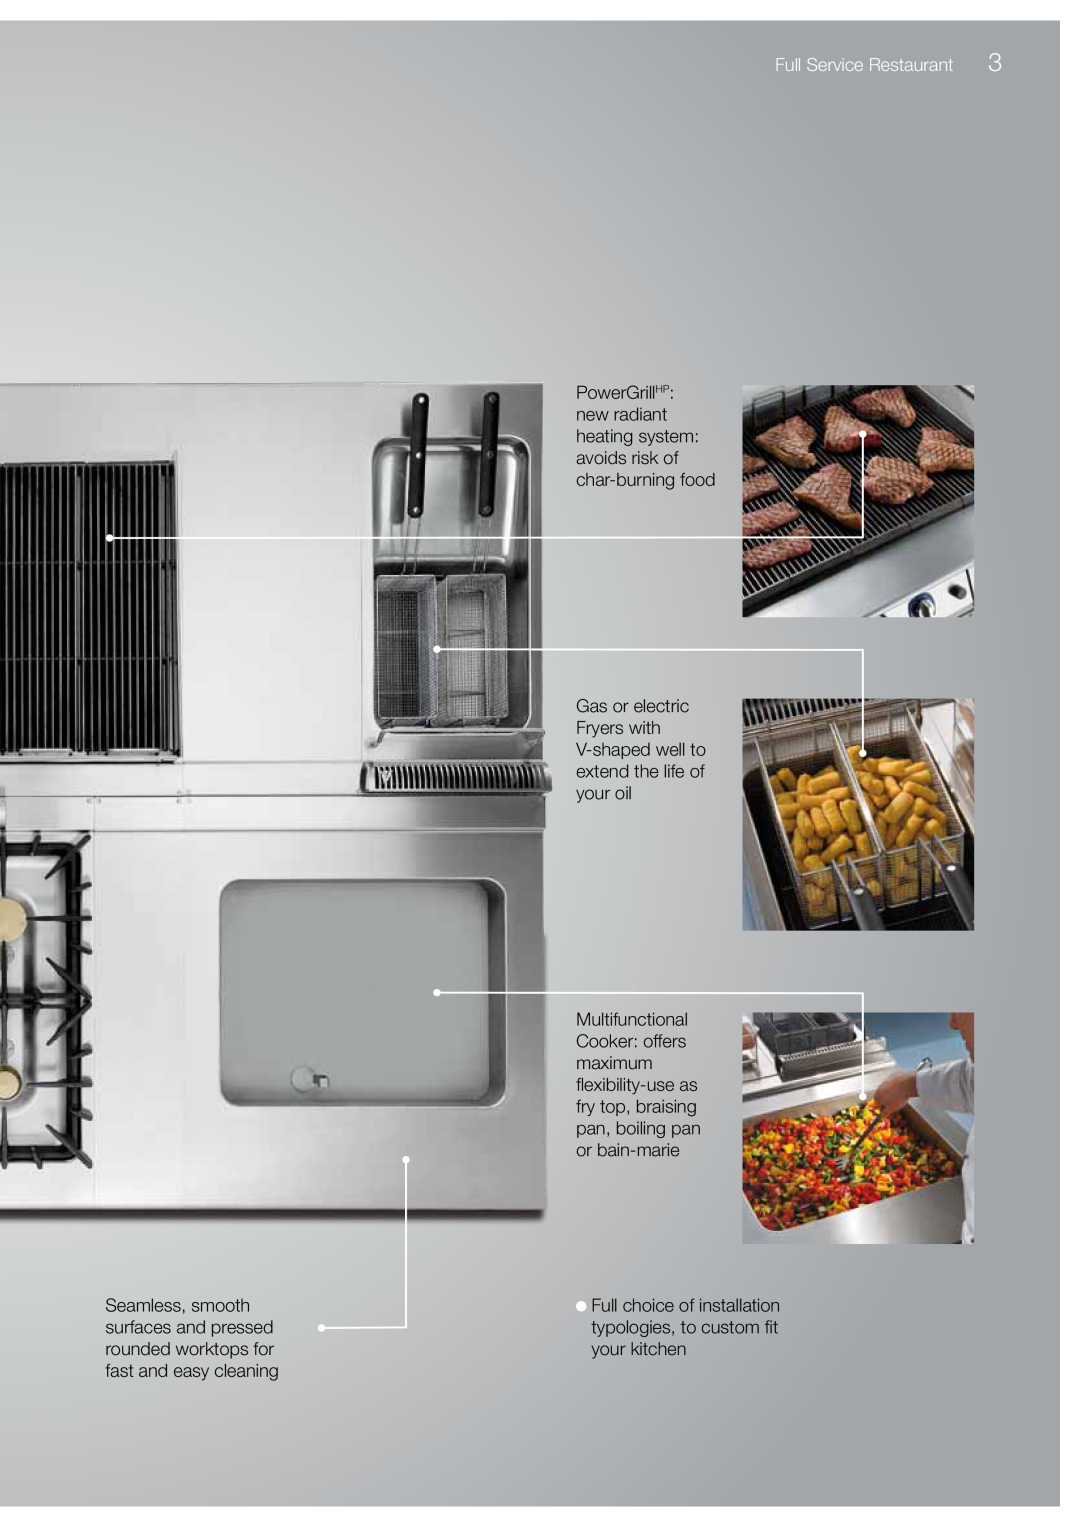 Electrolux 700XP, 900XP manual Full Service Restaurant, Full choice of installation typologies, to custom fit your kitchen 